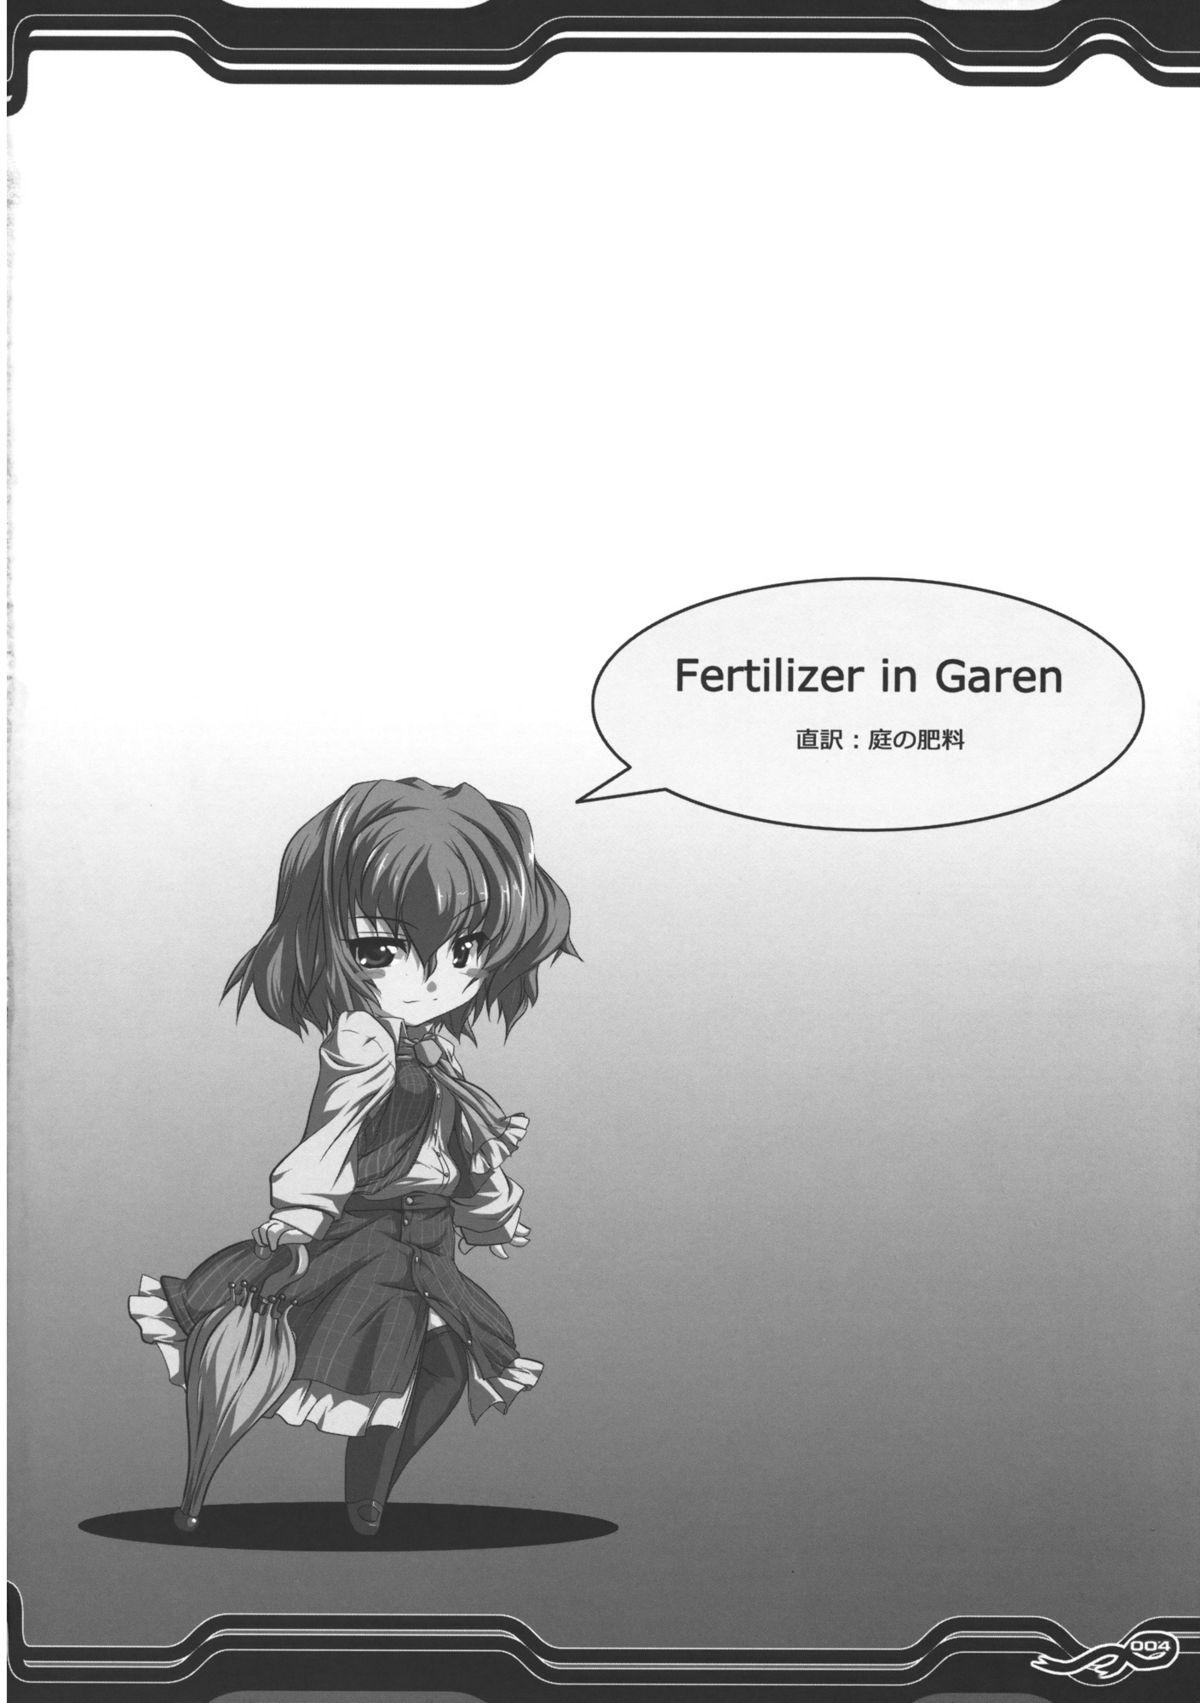 High FERTILIZER IN GARDEN - Touhou project Athletic - Page 3